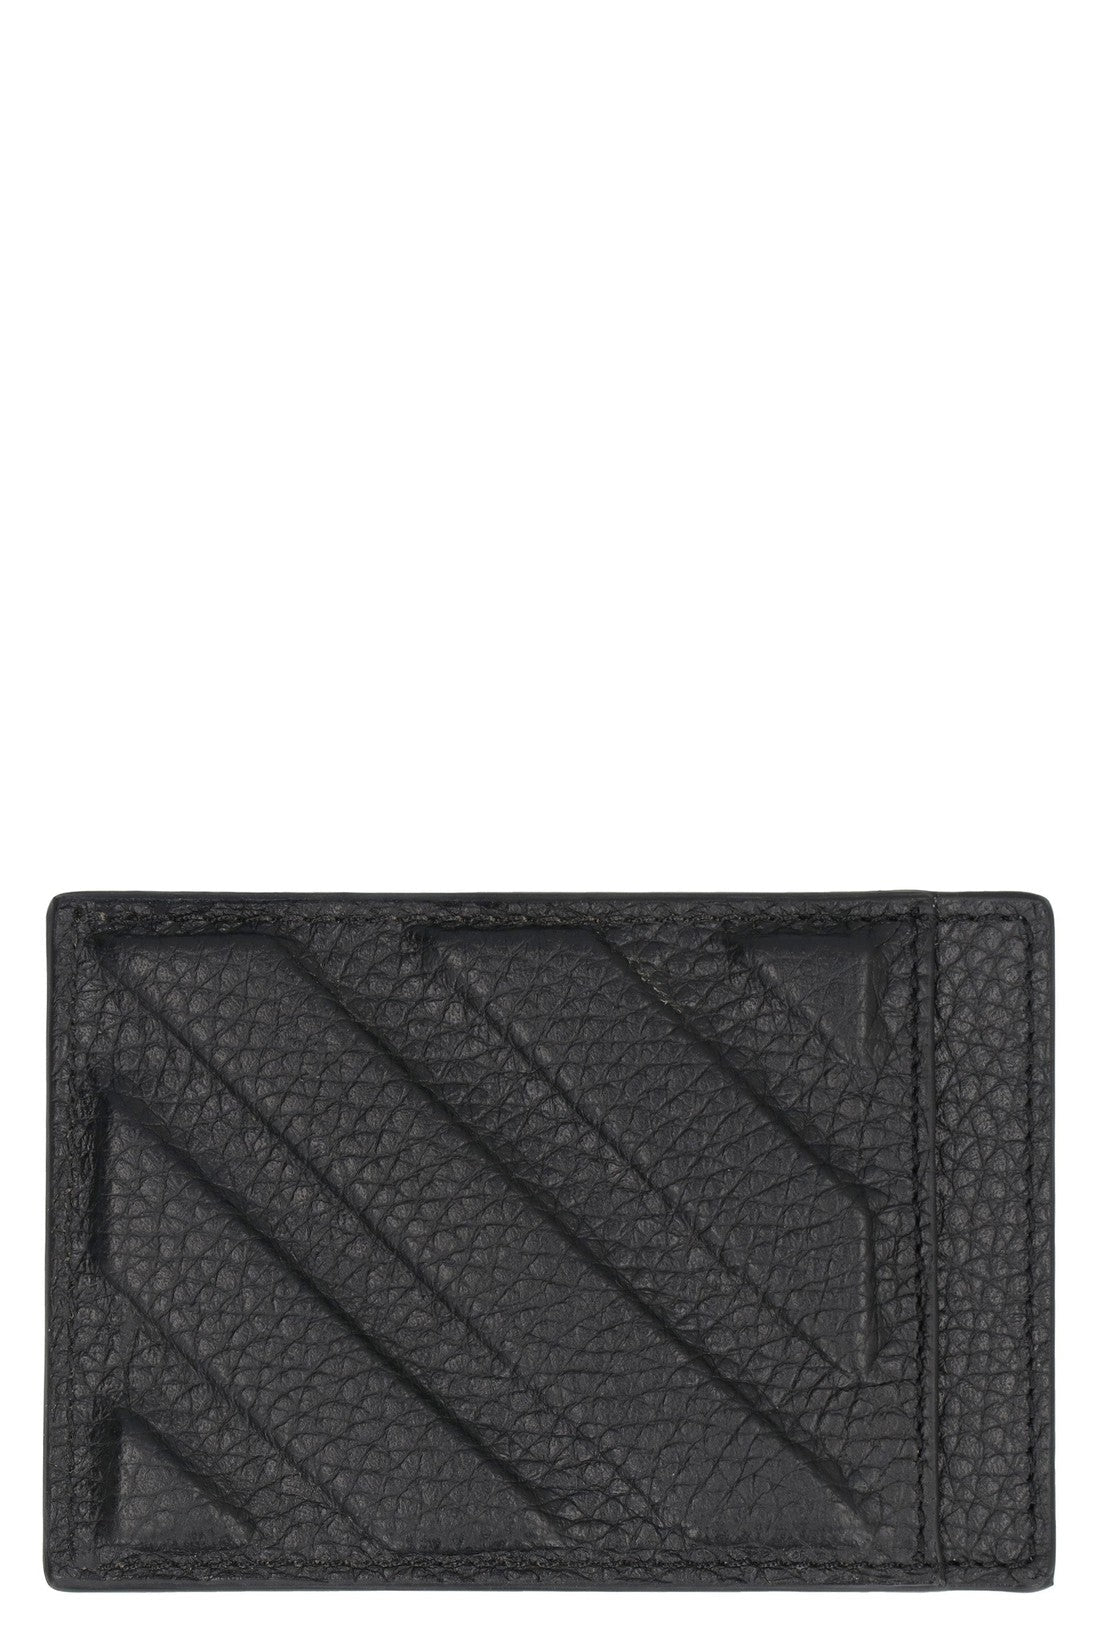 Off-White-OUTLET-SALE-Leather card holder-ARCHIVIST